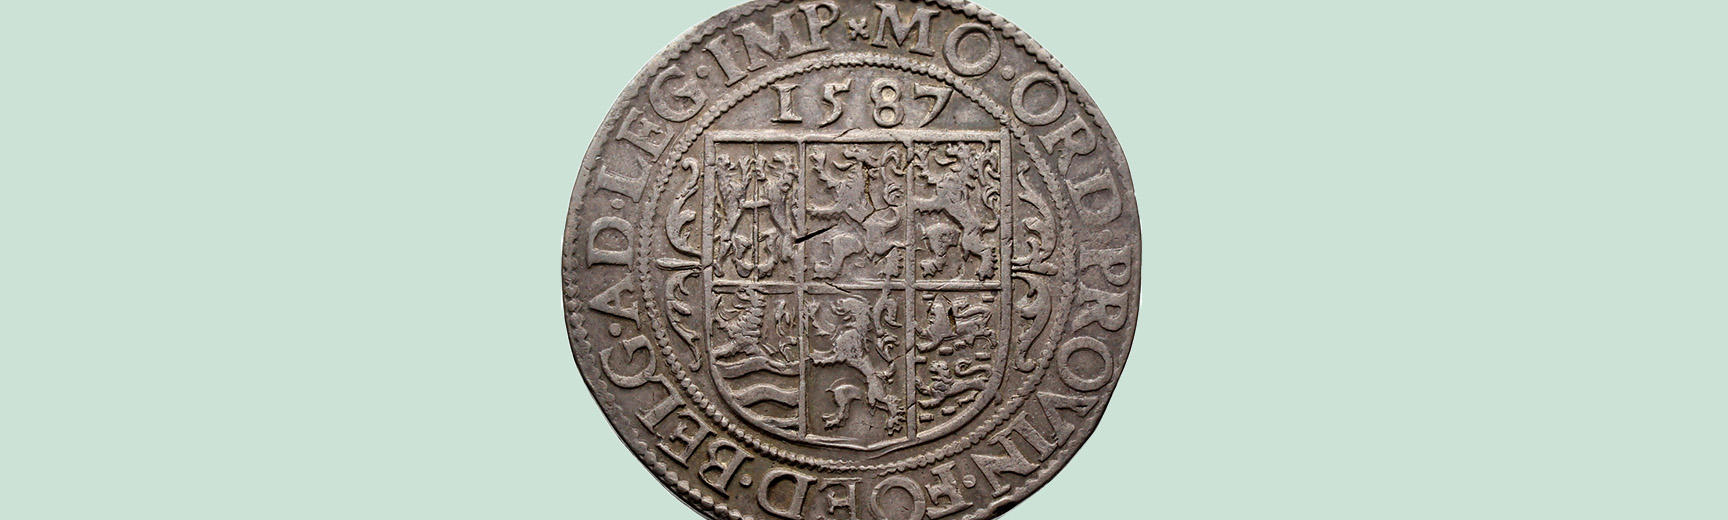 Silver coin back (Leicesterrijksdaalder) of Robert Dudley, Earl of Leicester, Lord of Denbigh, 1564-1588 from Harderwijk (Modern), 1587